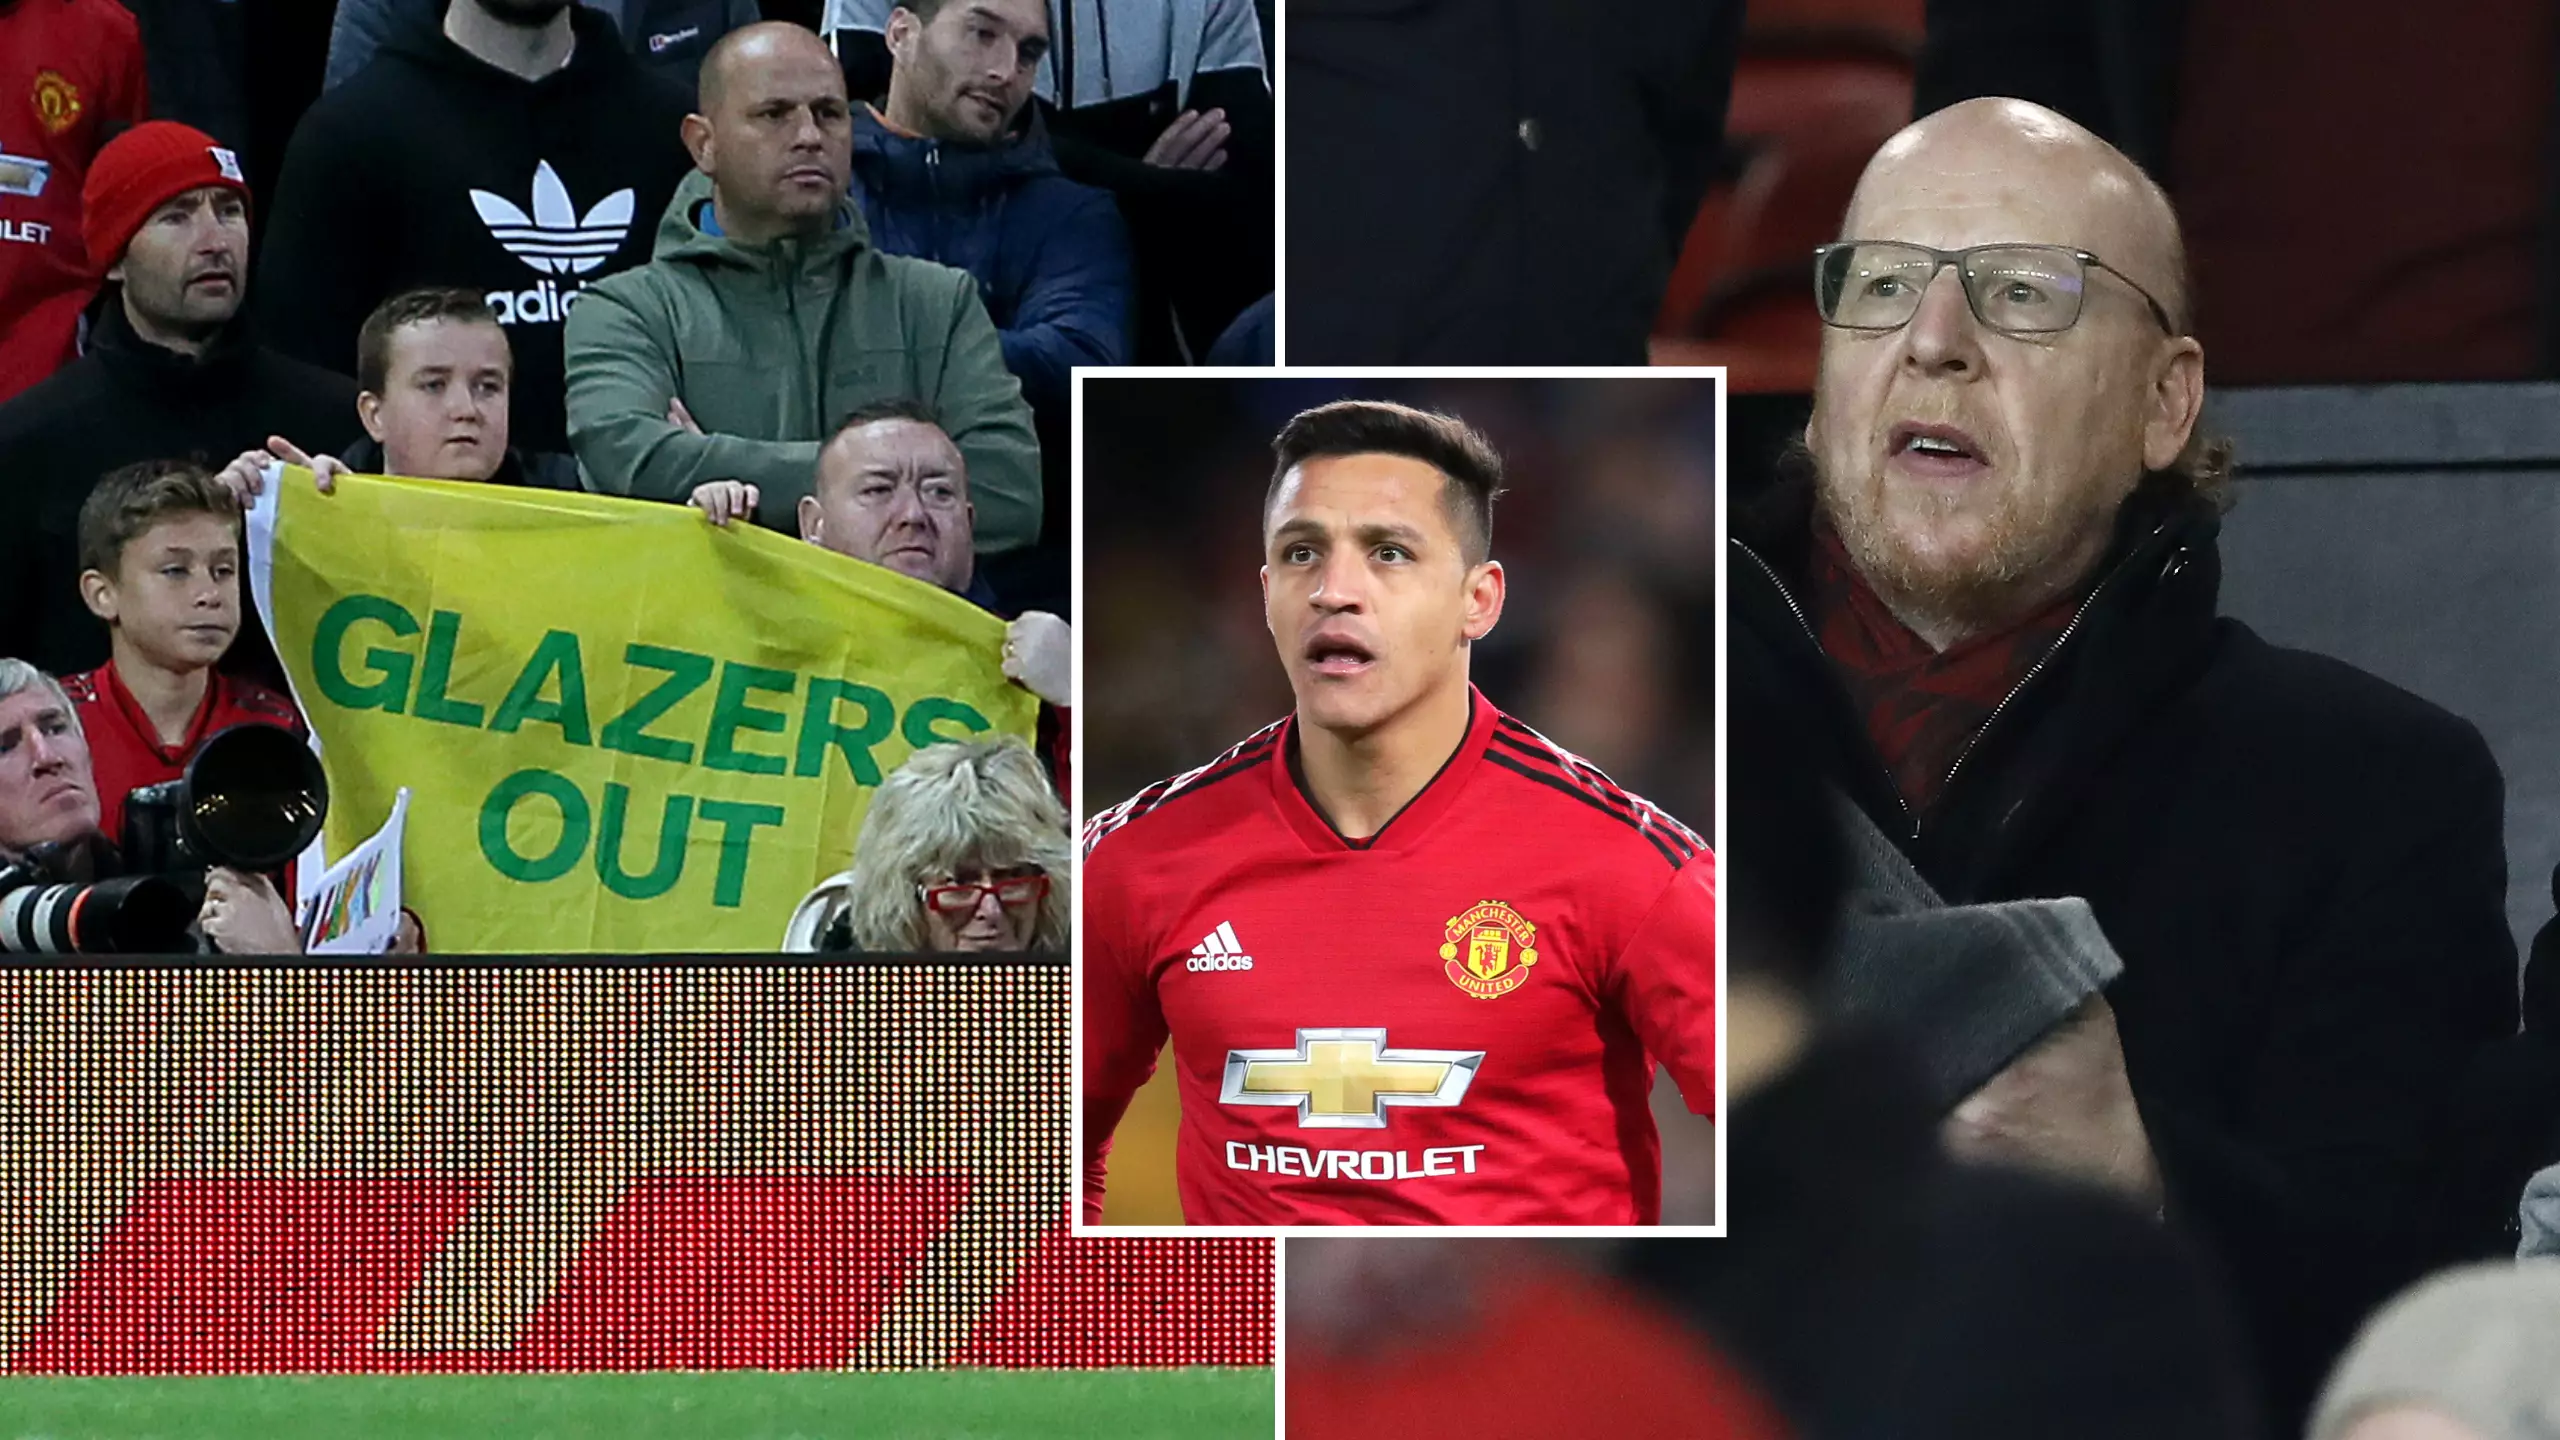 Manchester United Fans Told They 'Complain Too Much' About The Glazers In Extraordinary Rant